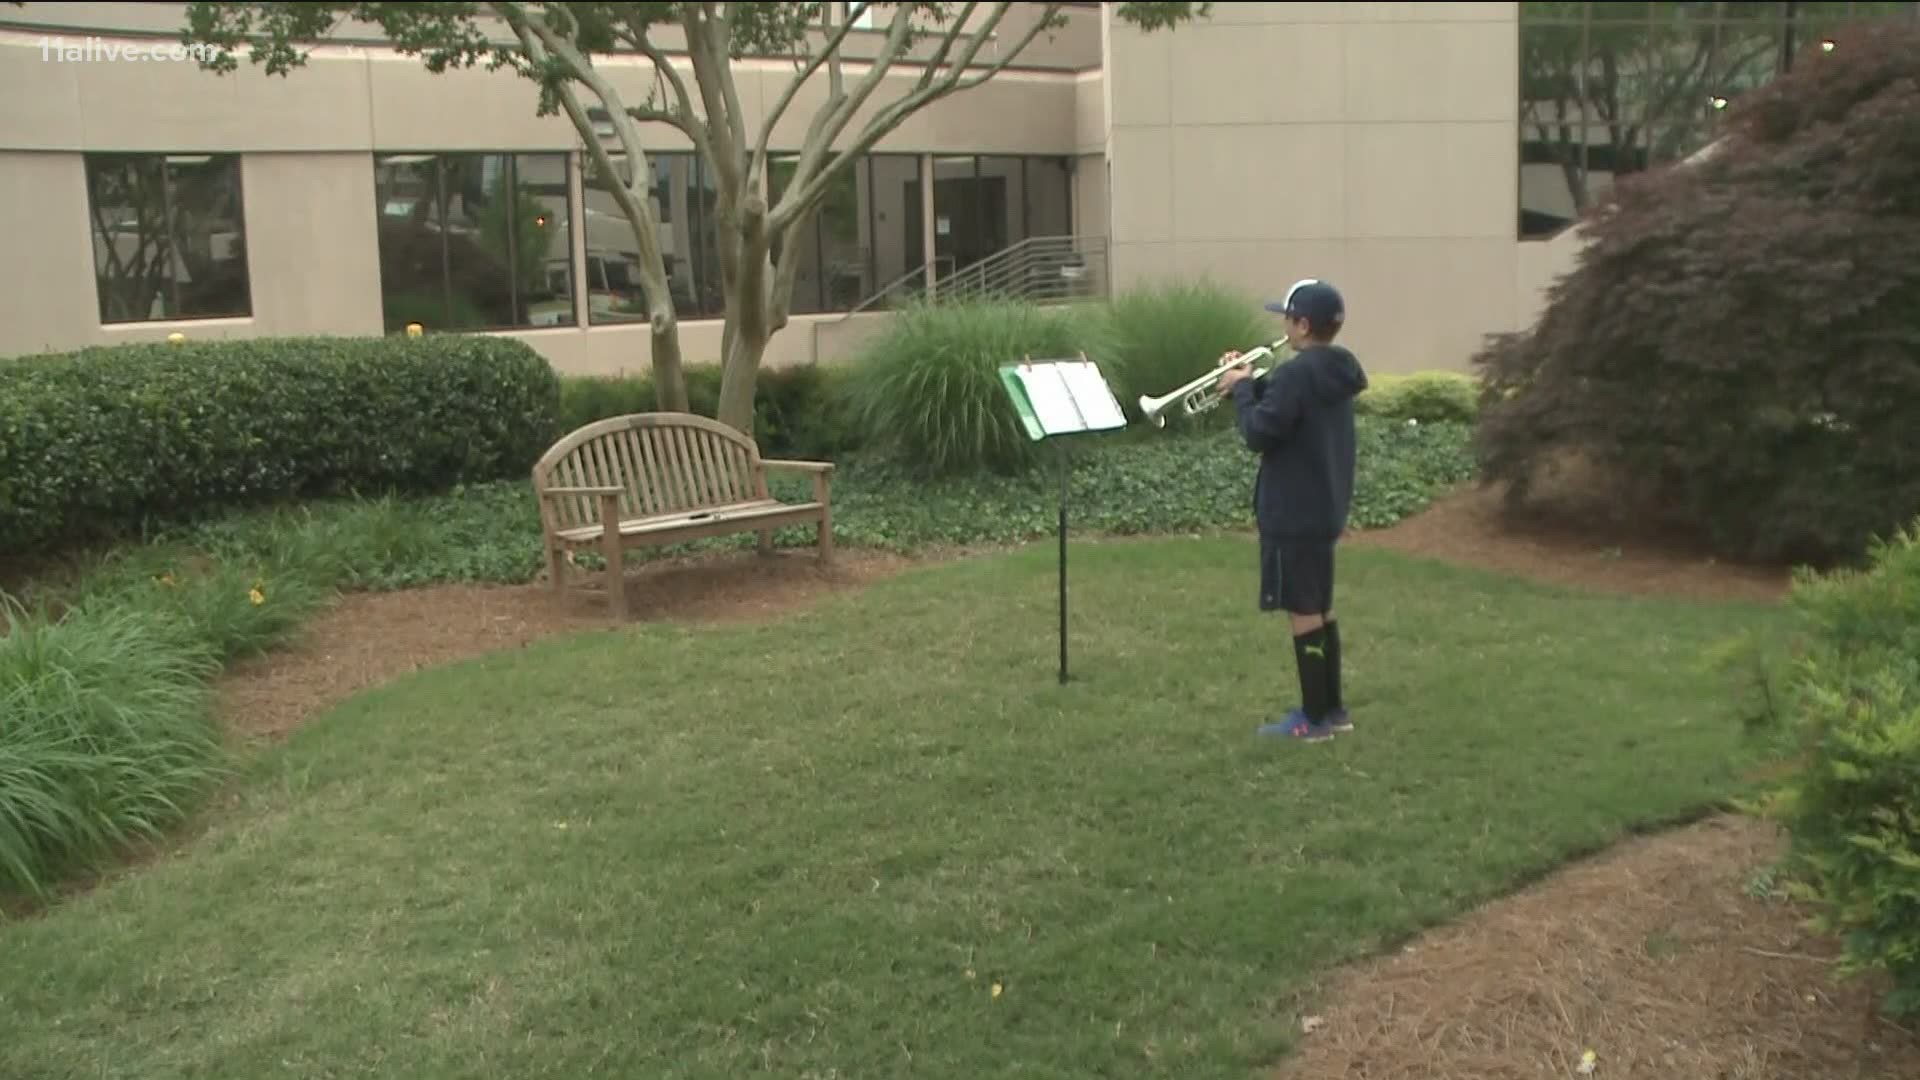 For almost 30 days, a 6th grader brings his trumpet to Emory Hospital in Decatur to play for workers during shift change.